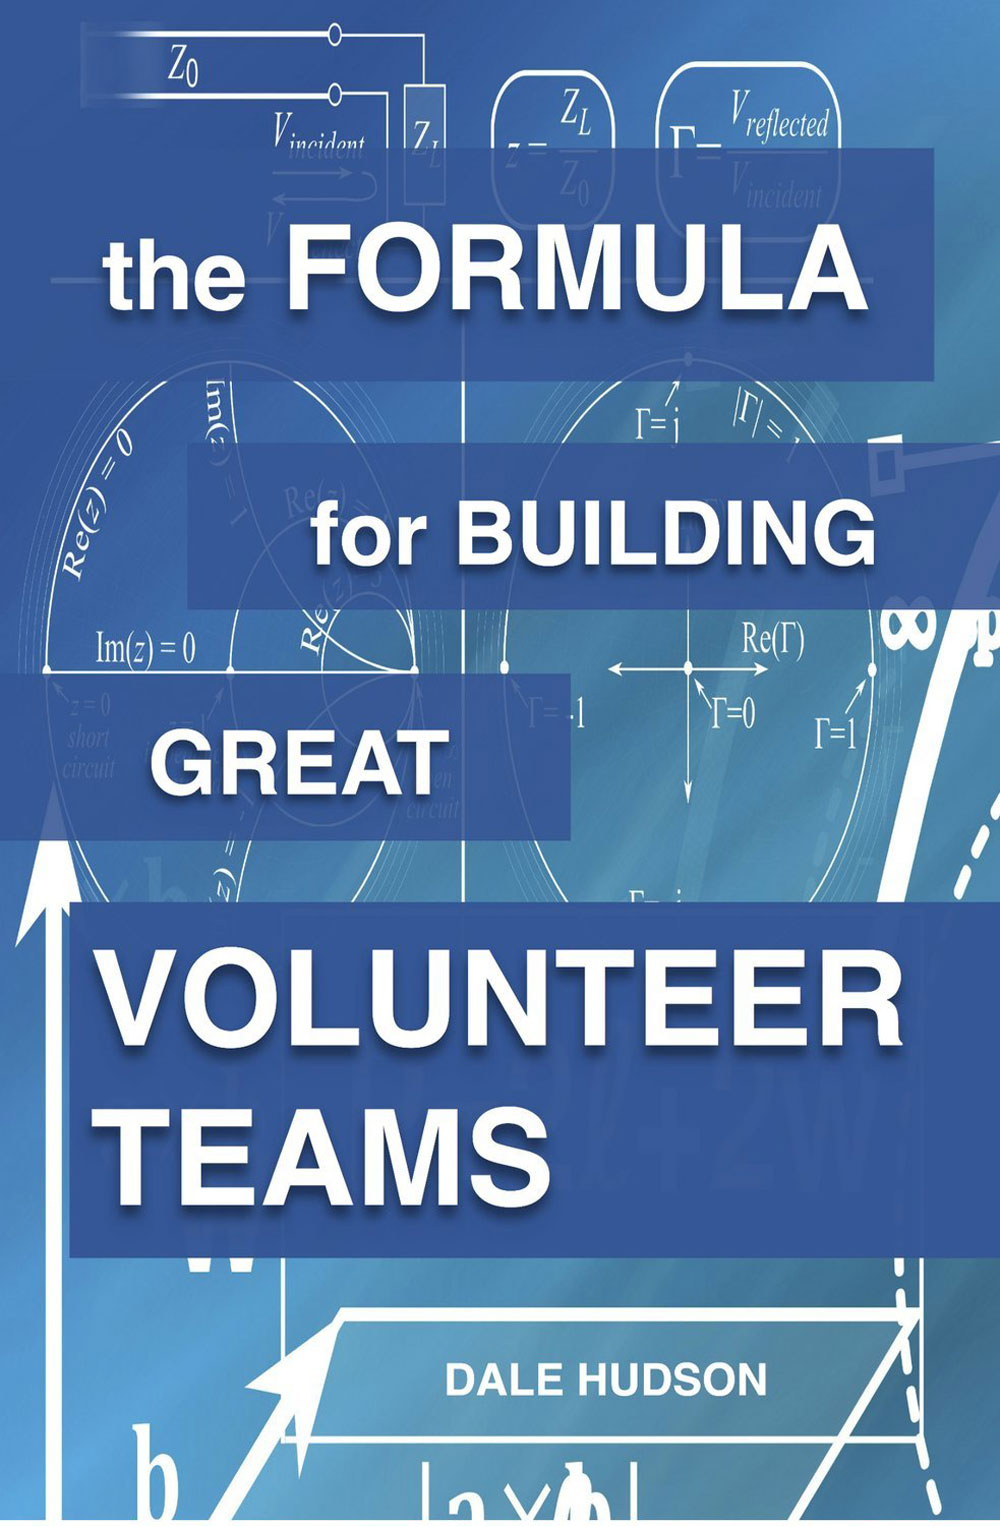 Book Review: The Formula for Building Great Volunteer Teams